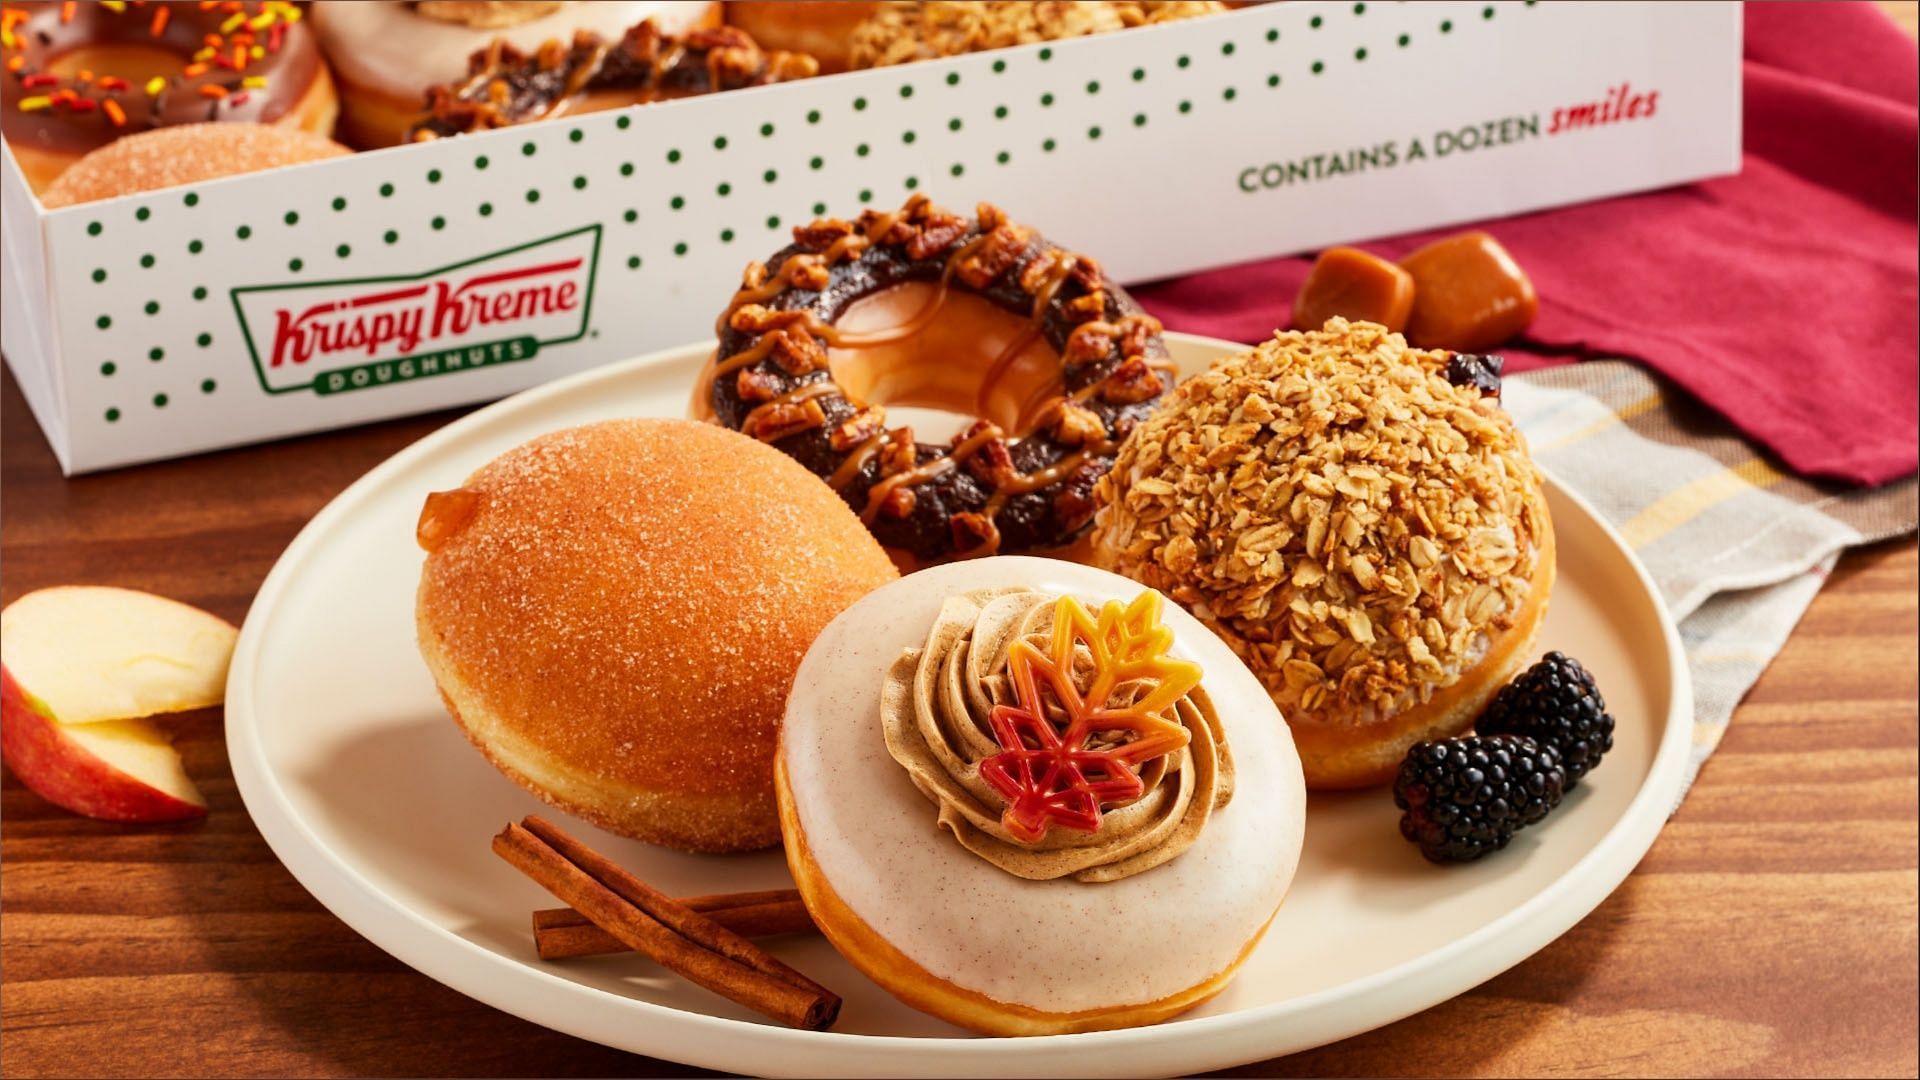 The Flavors of Fall collection starts at over $2.79 and is available in stores until Thanksgiving (Image via Krispy Kreme)